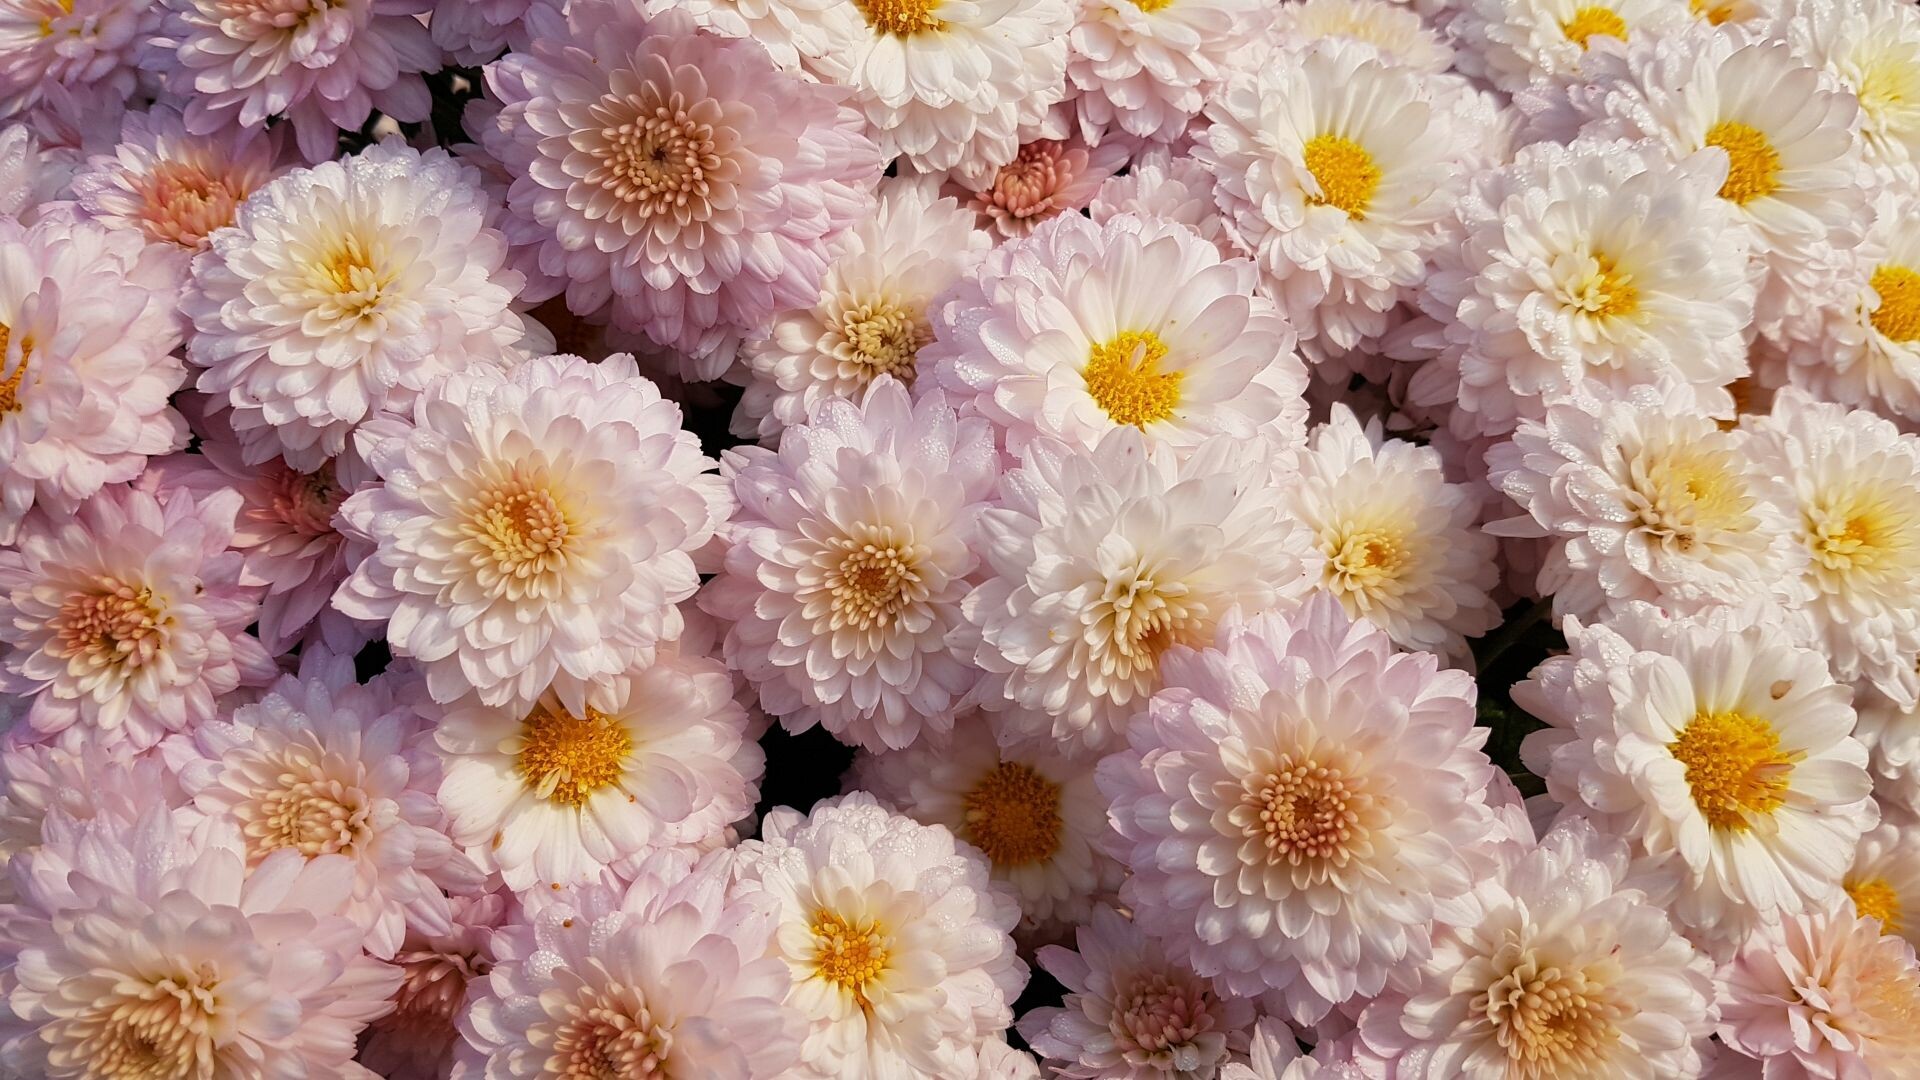 Chrysanthemum: Some species and hybrids have only disc florets in the flower head, while others have both ray and disc florets. 1920x1080 Full HD Wallpaper.